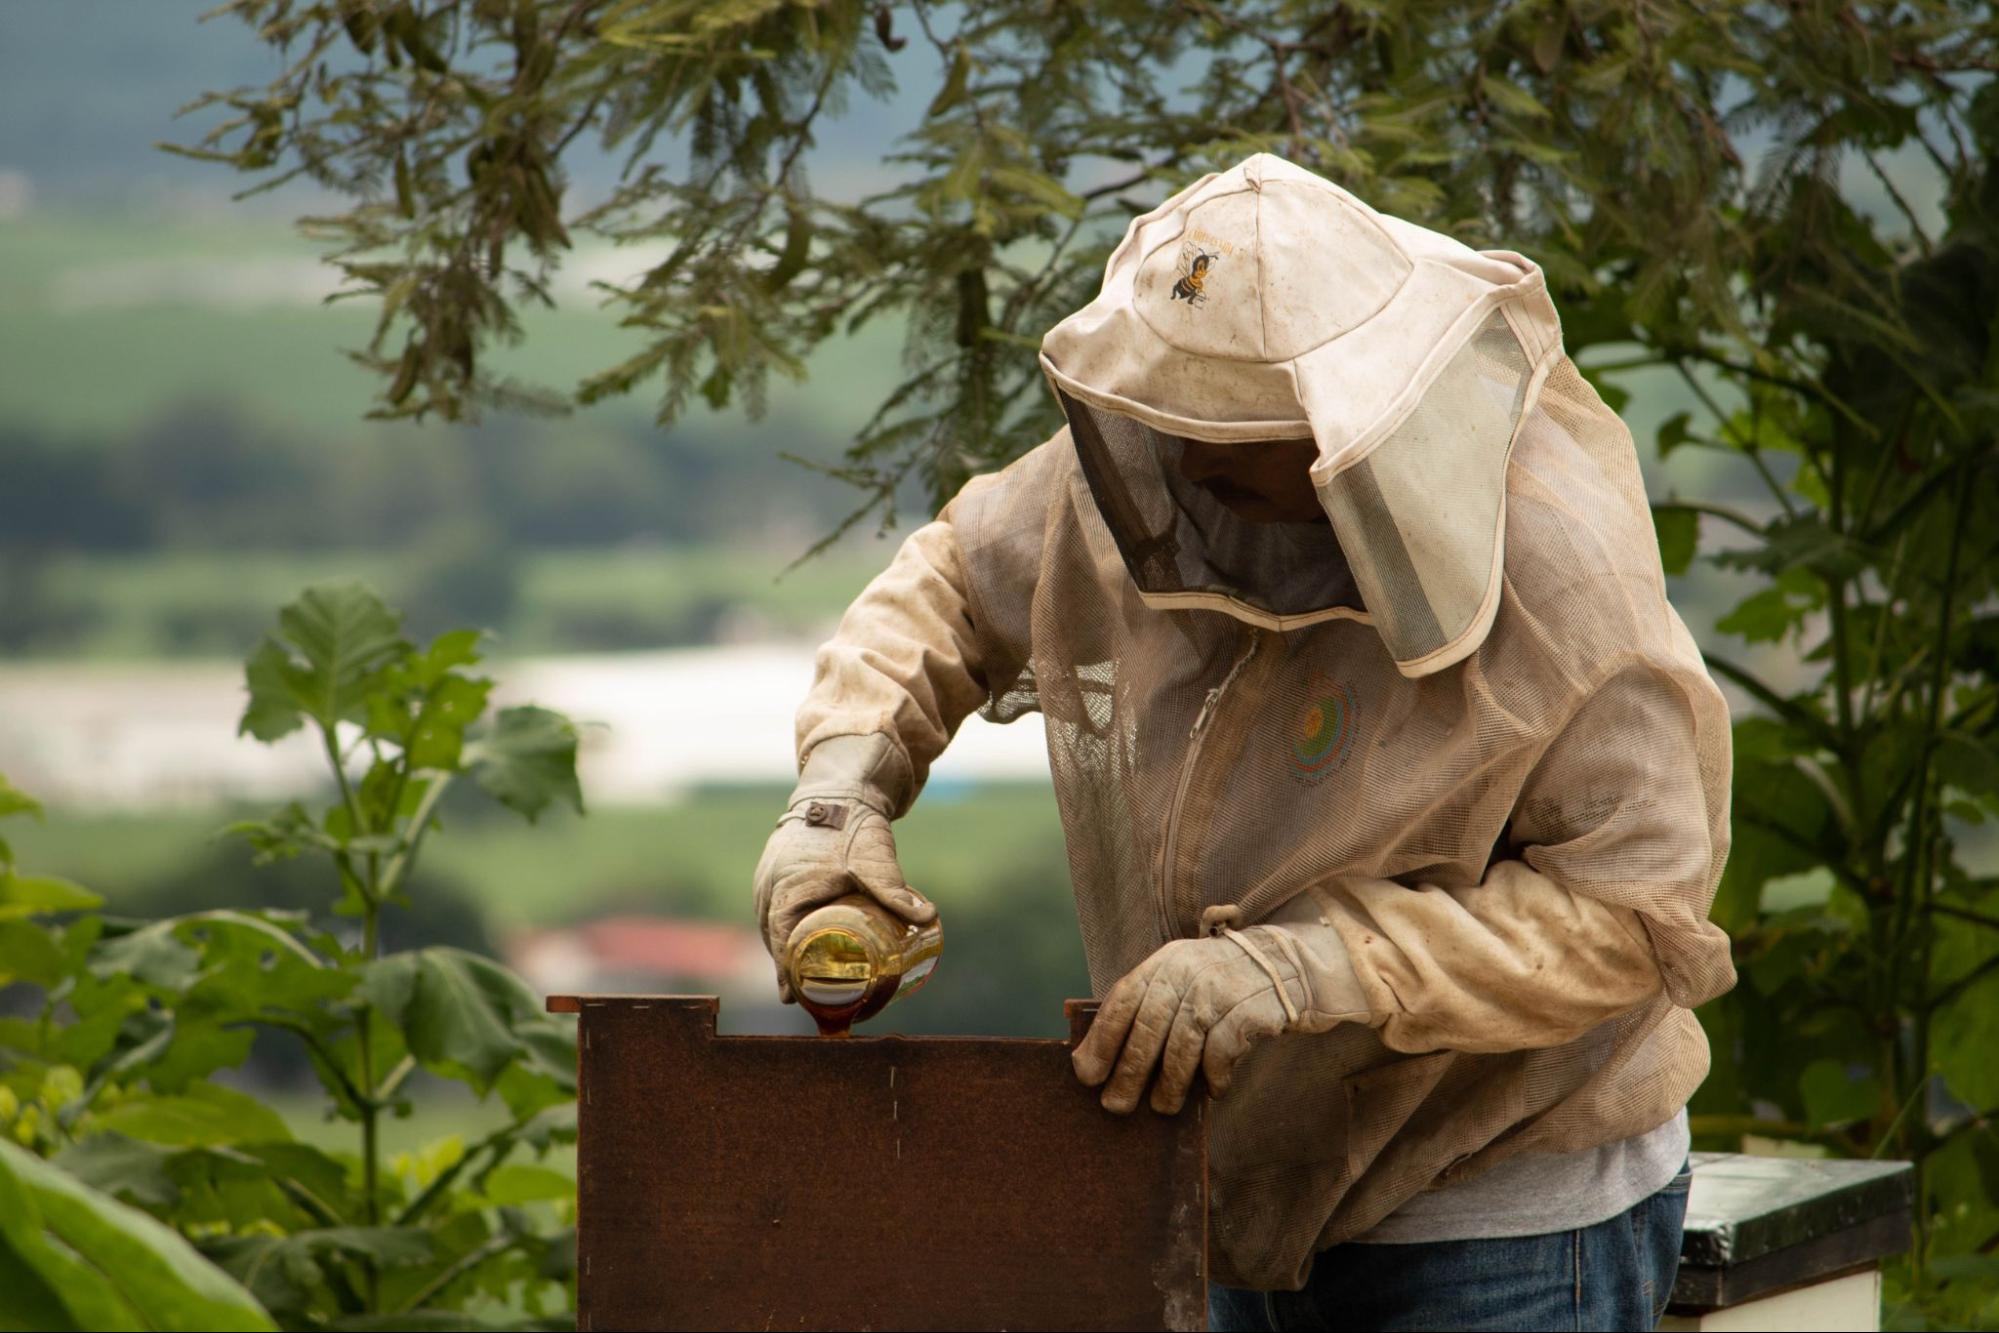 Beekeeper in protective suit pouring honey into container with bee on sleeve against green landscape background